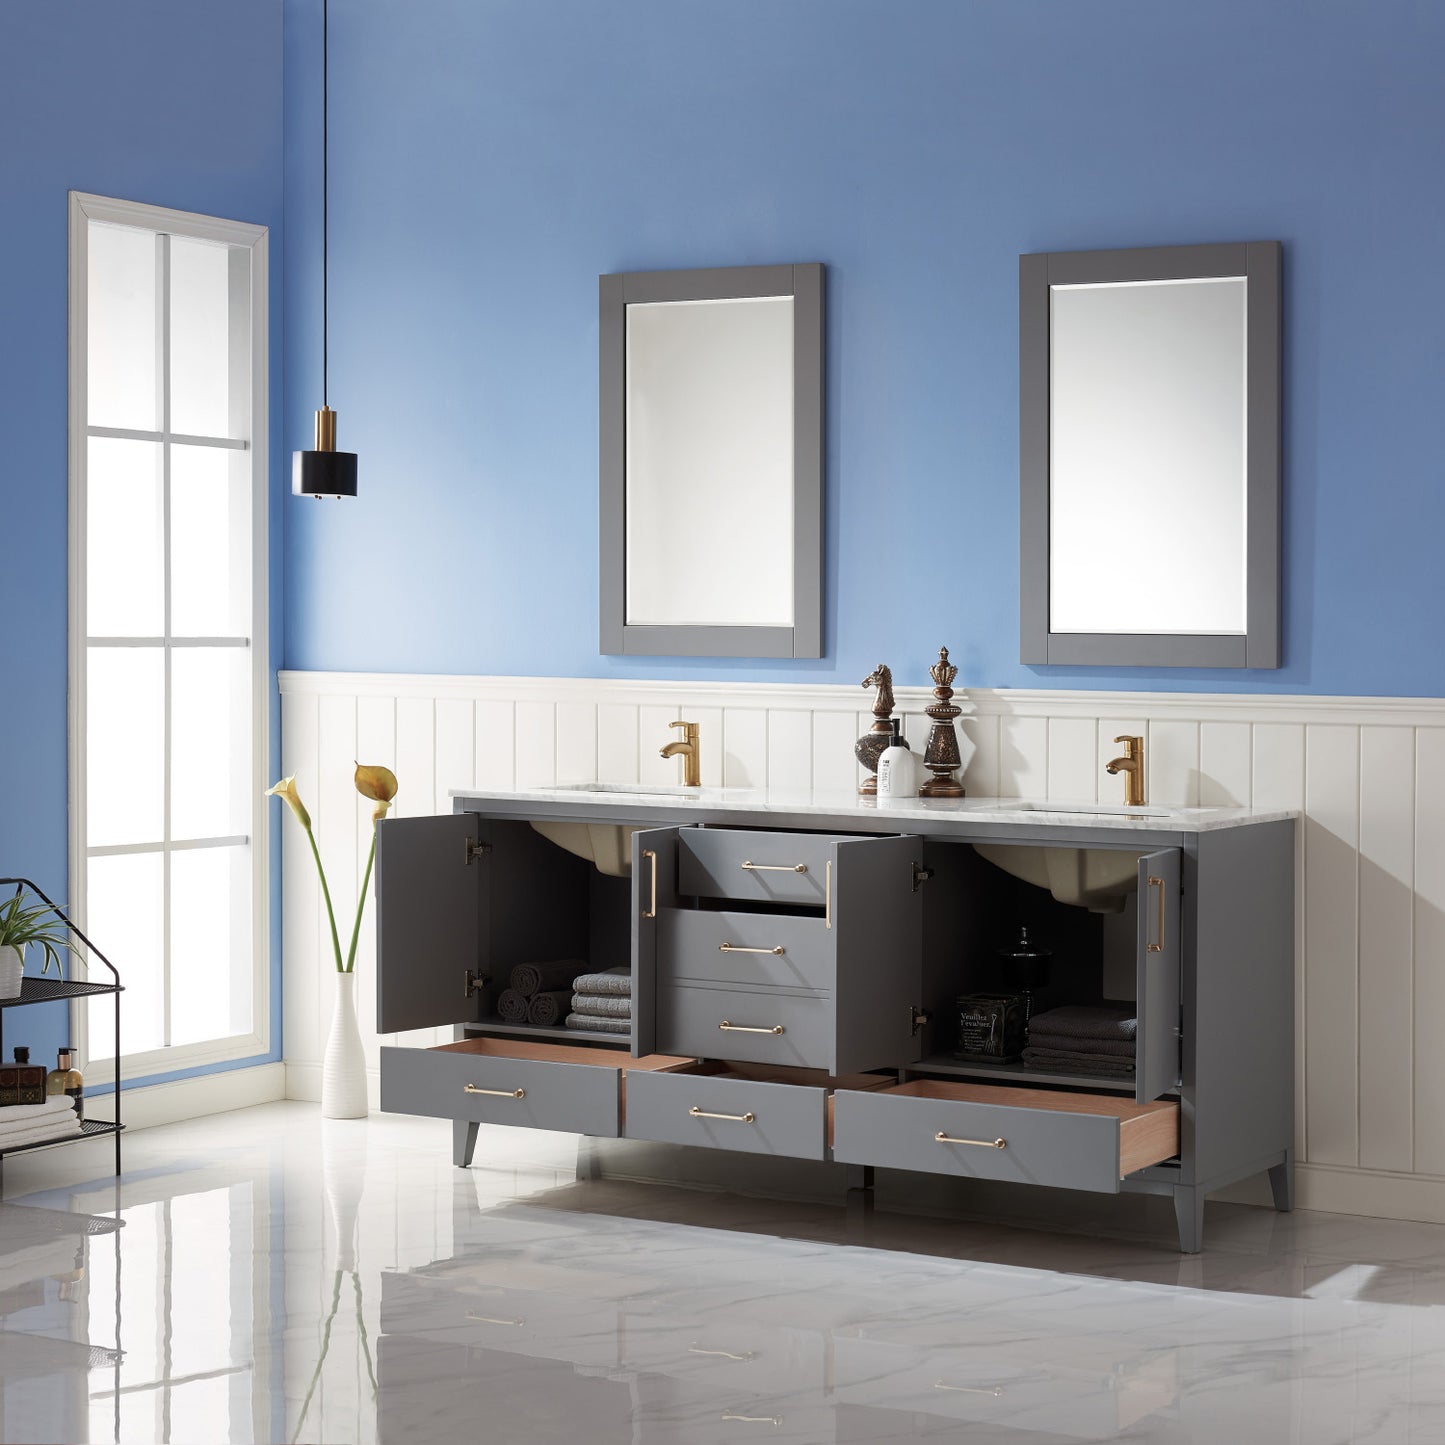 Sutton 72" Double Bathroom Vanity Set in Gray and Carrara White Marble Countertop